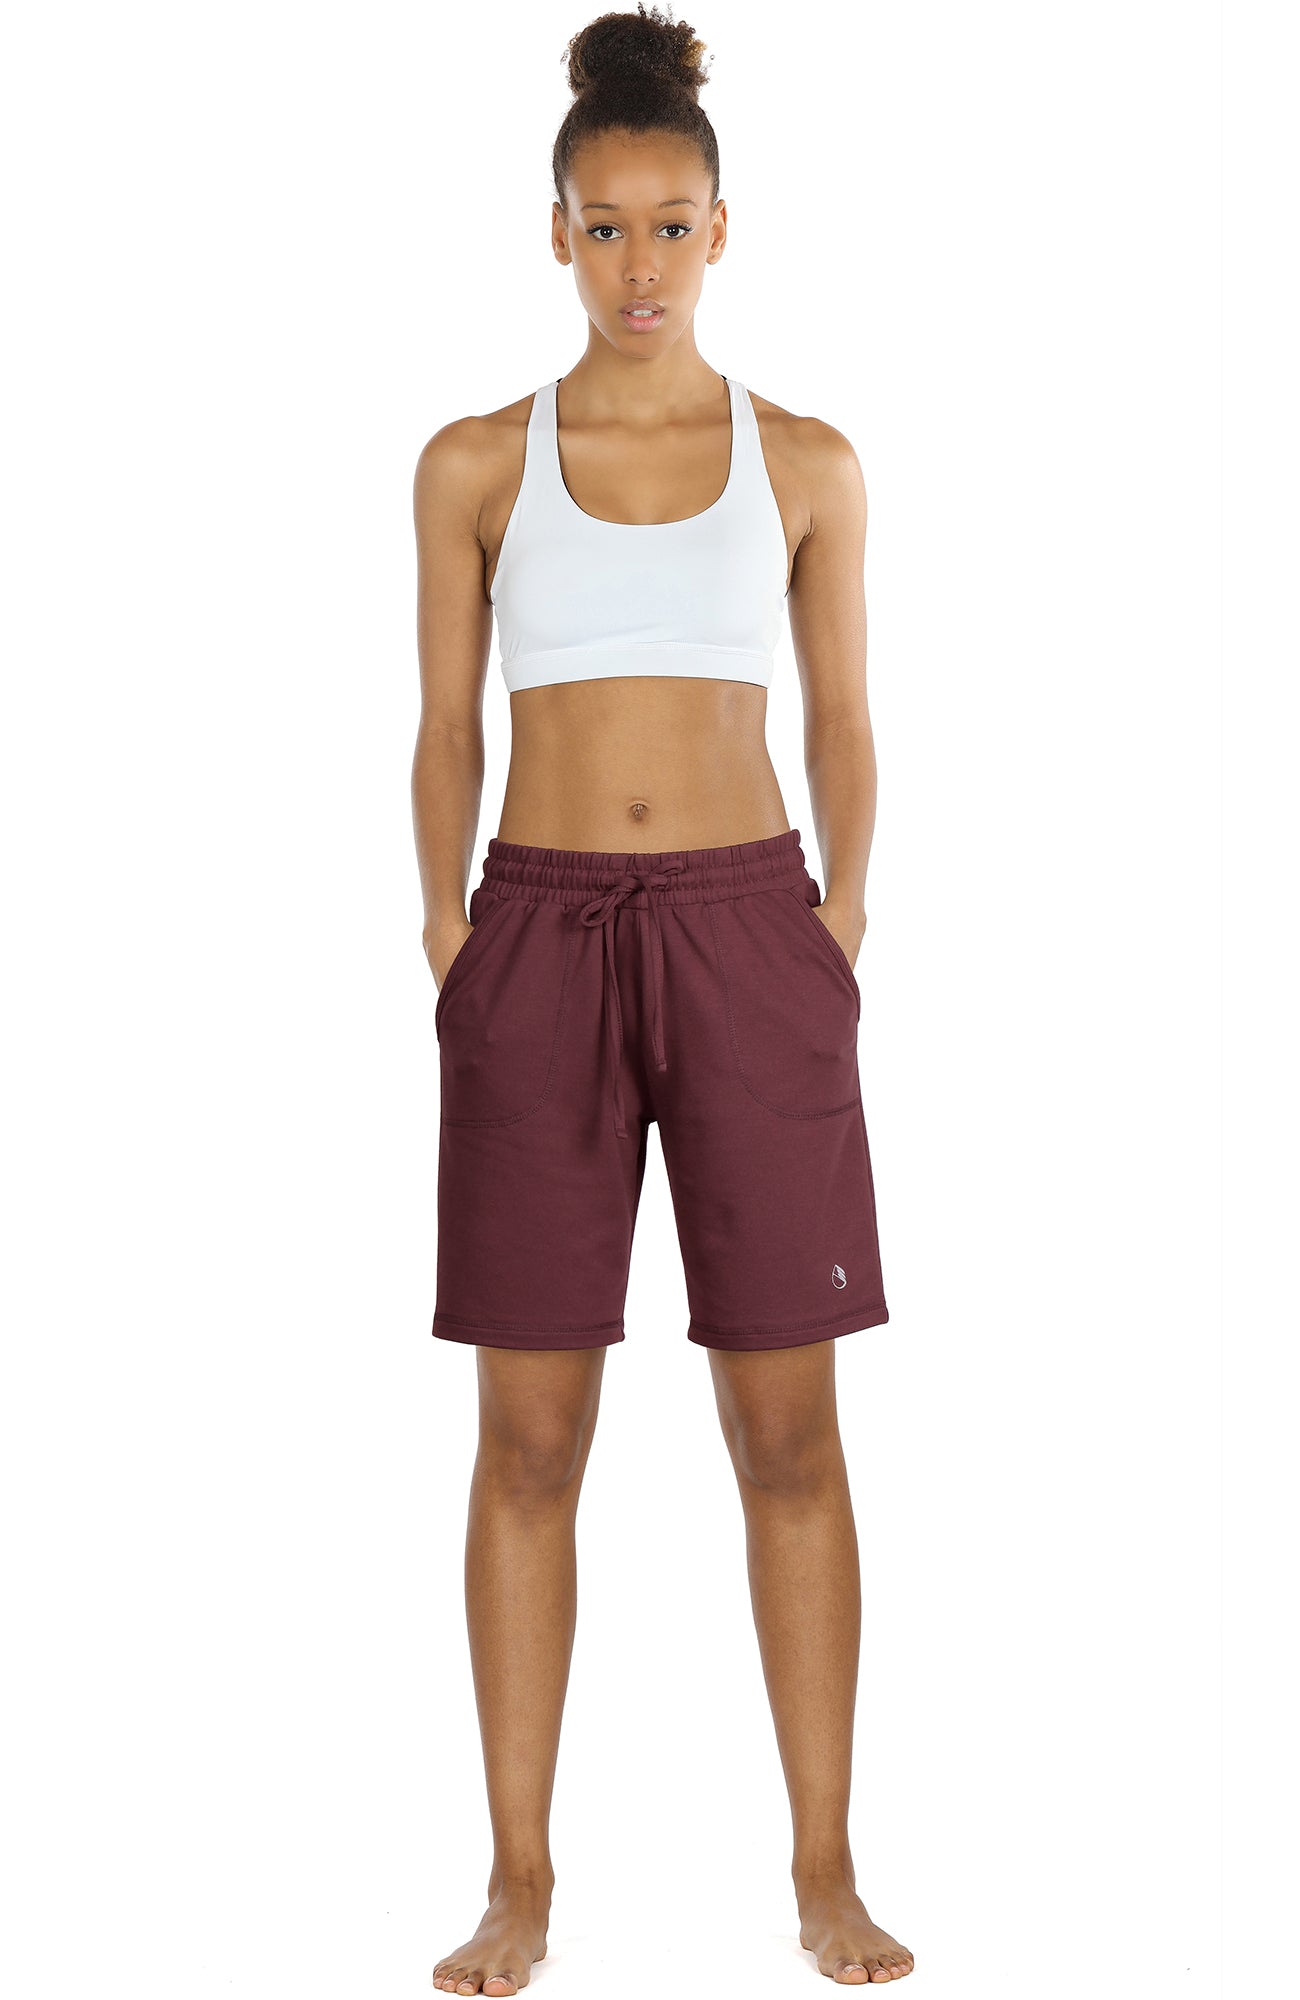 SP12 icyzone Workout Shorts for Women - Activewear Exercise